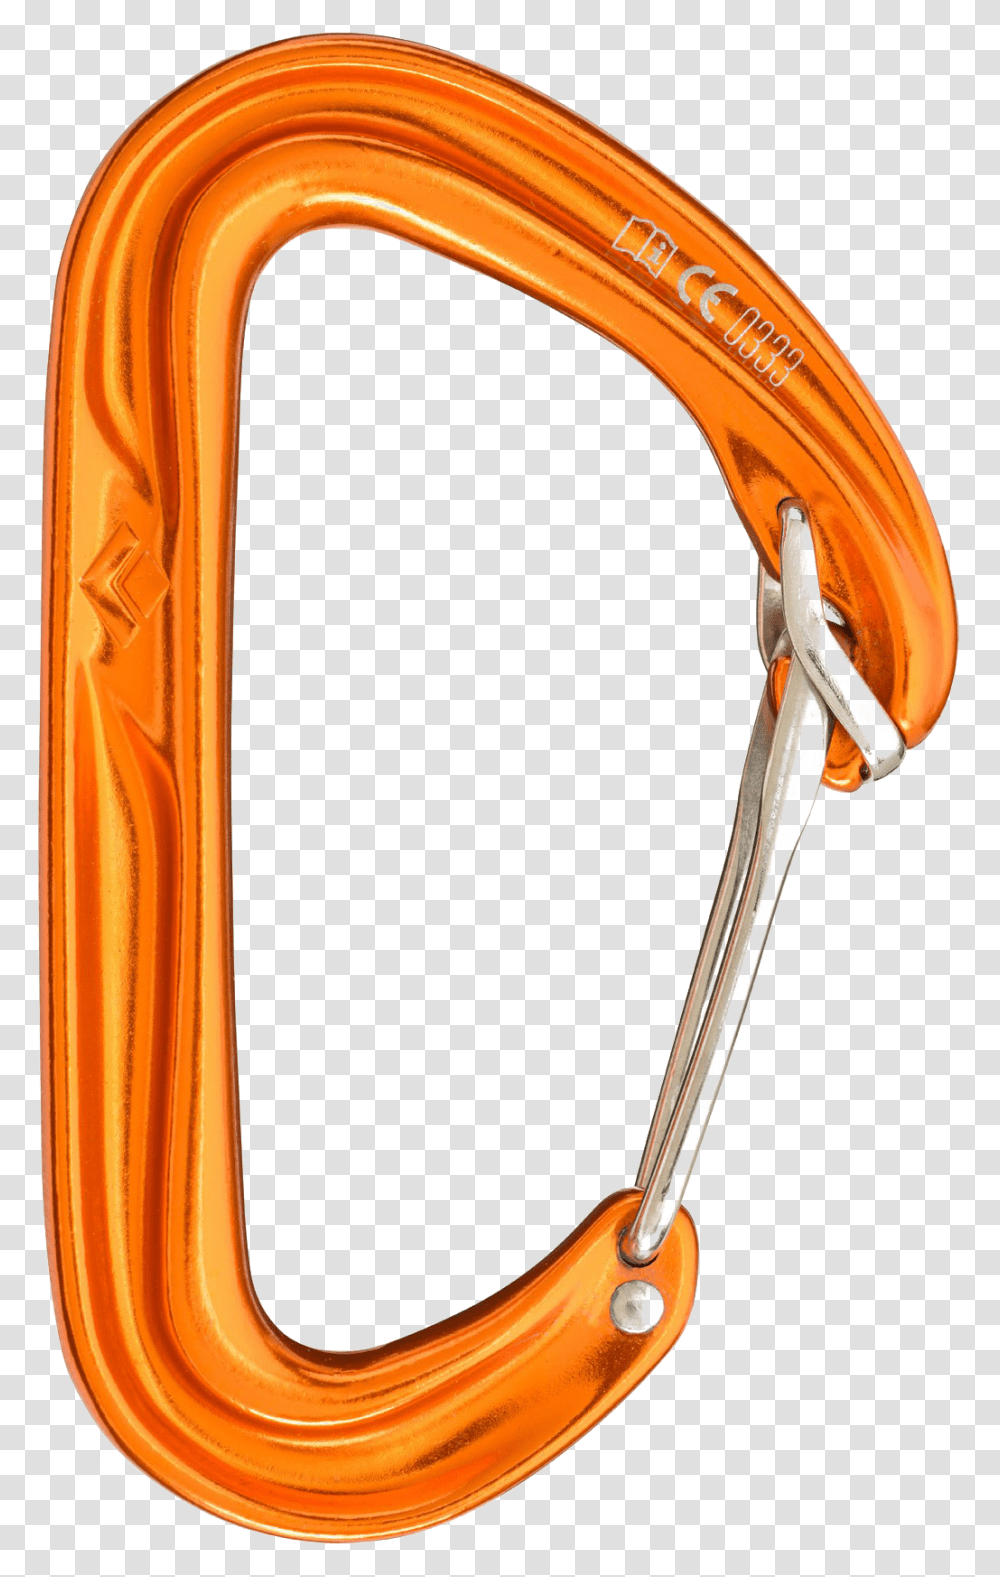 Orange Carabiner Background Play Black Diamond Hoodwire Carabiner, Clothing, Glasses, Accessories, Graphics Transparent Png